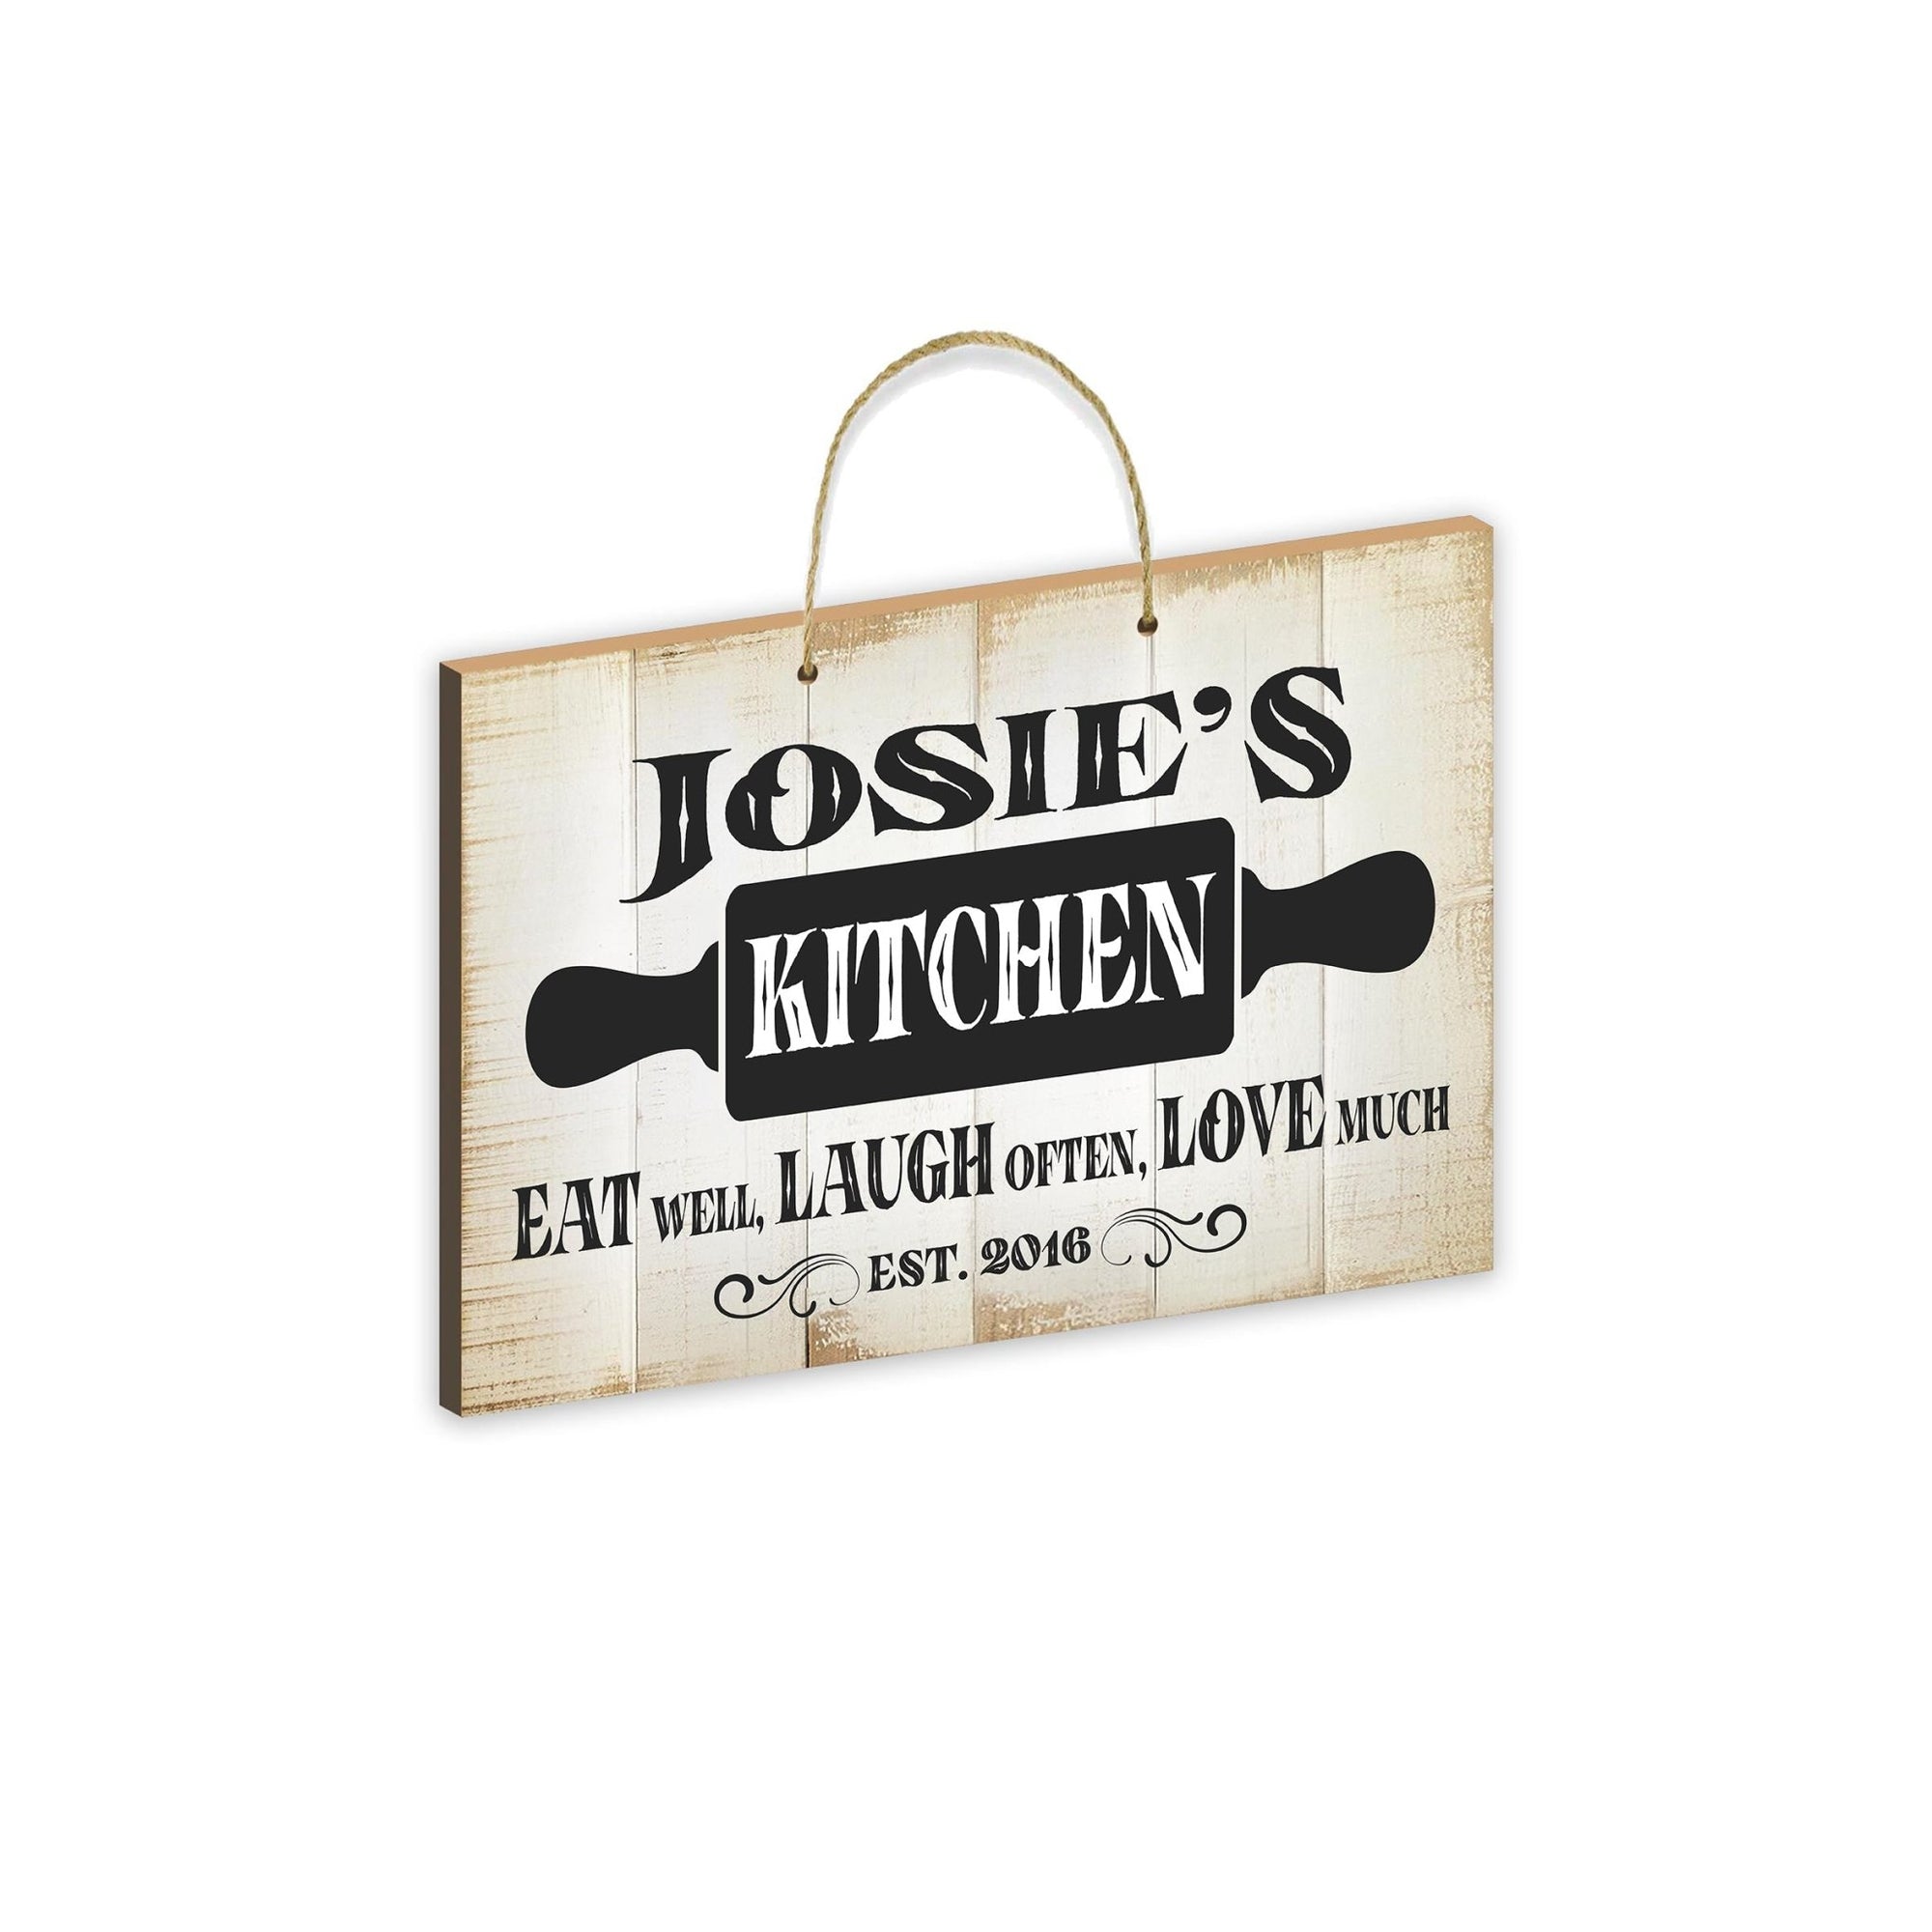 Inspirational Rustic Wooden Wall Hanging Rope Sign Kitchen Décor - Eat Well, Laugh Often, Love Much [KITCHEN]